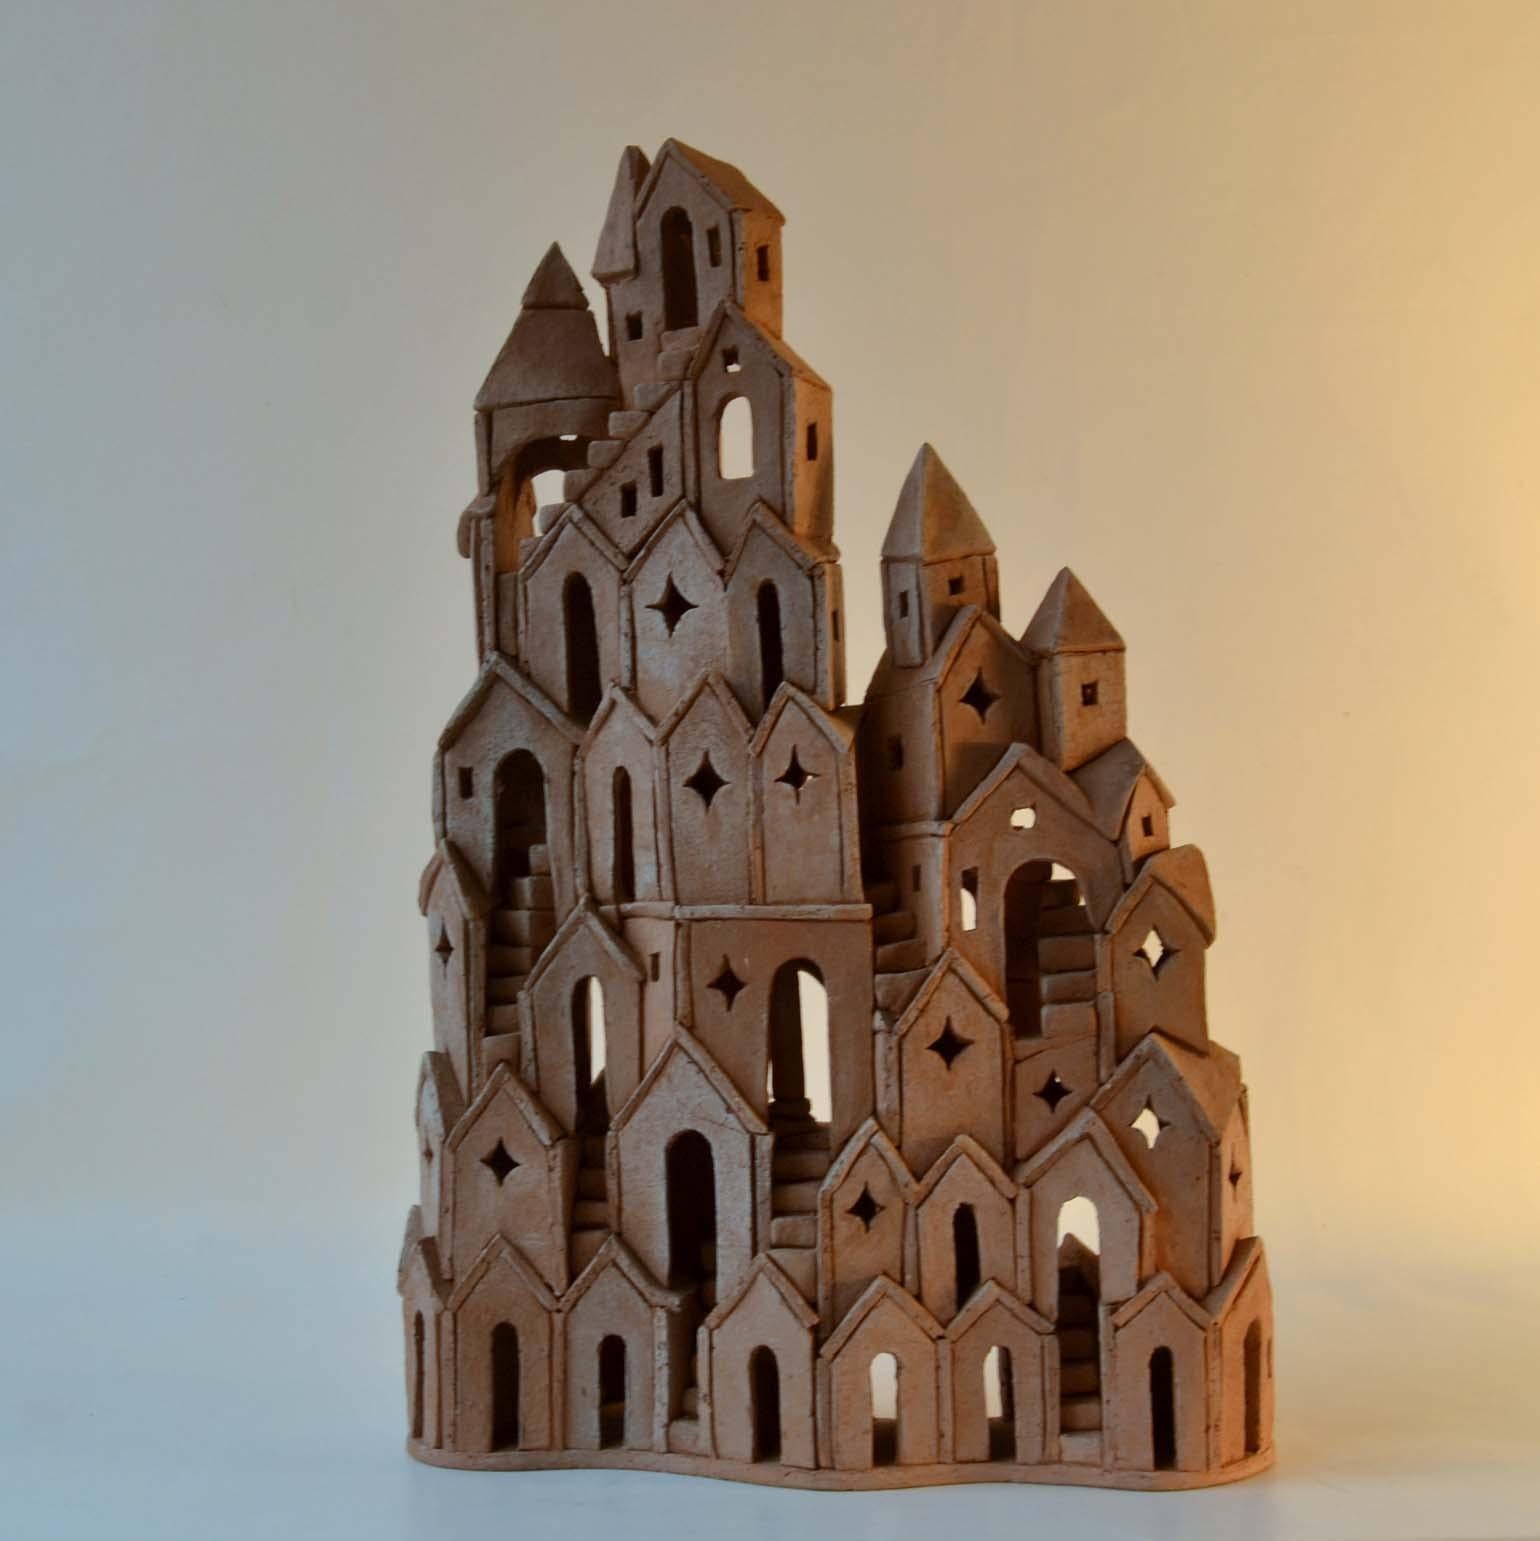 Late 20th Century Architectural Surreal Ceramic Tower Sculpture 2 by Dutch Arie Bouter 1995